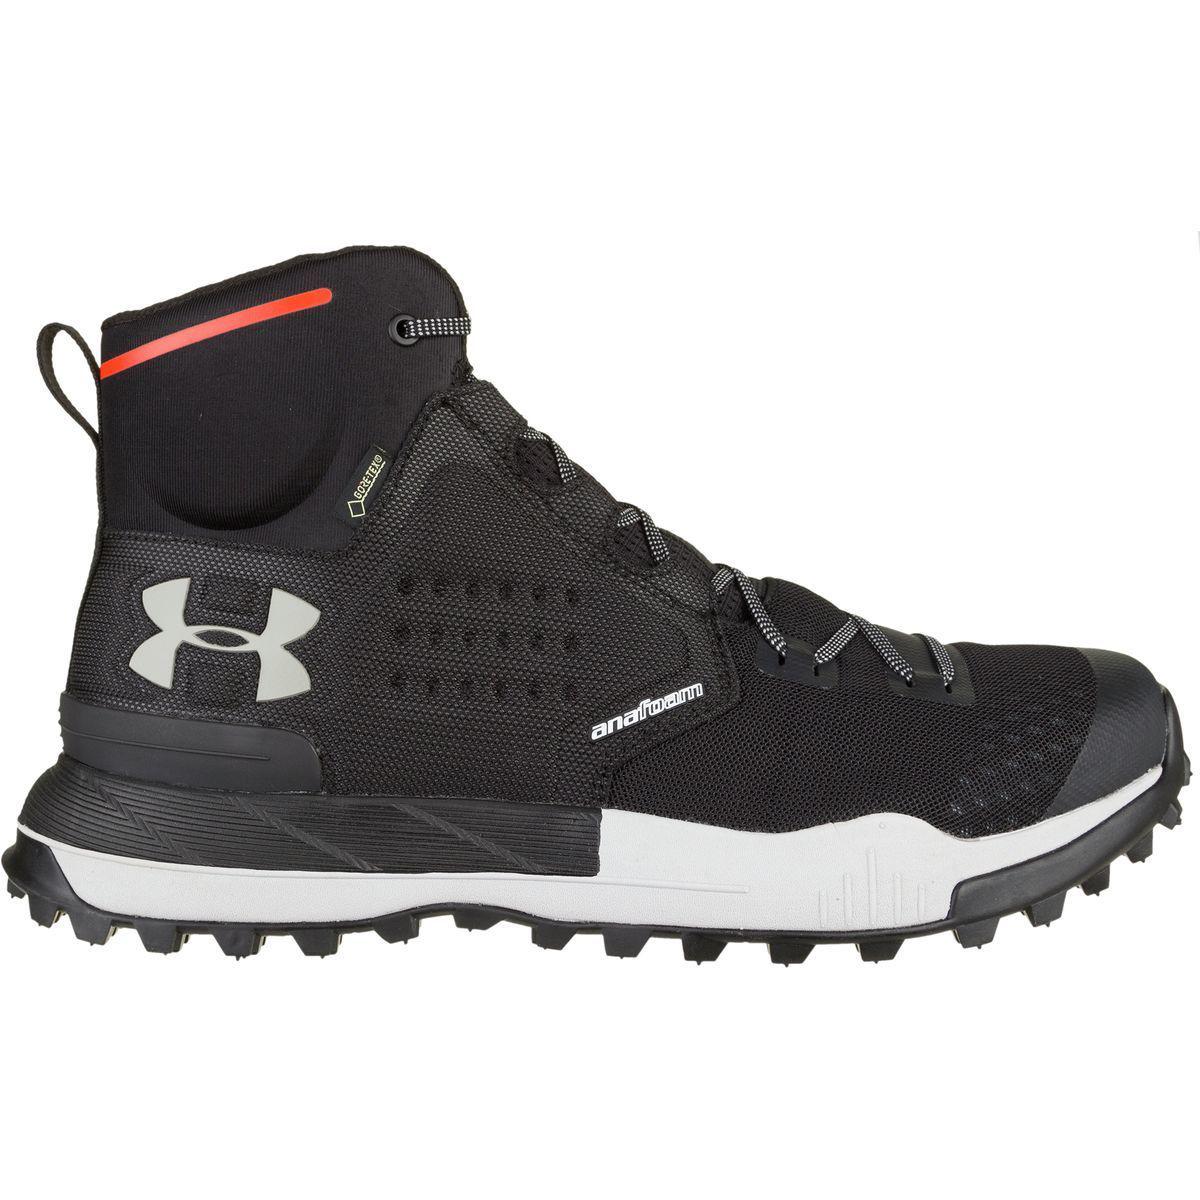 Lyst - Under Armour Newell Ridge Mid Gtx Boot in Black for Men